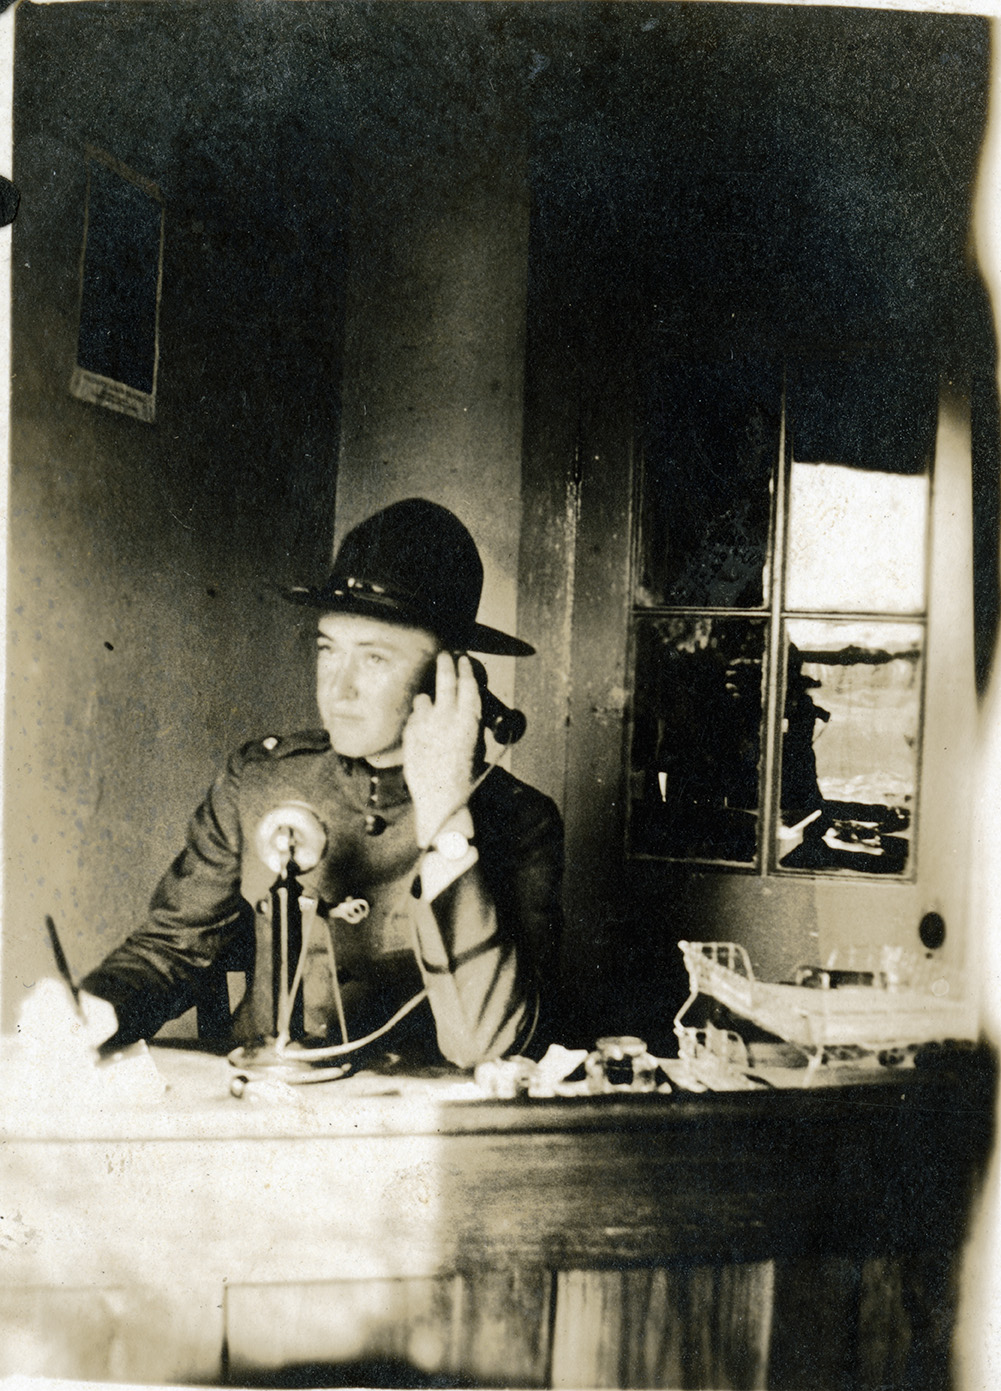  James M. Terrill, wearing a uniform similar to WWI army uniforms, sits at a desk and takes a note while using a telephone from the early 1900's. The telephone has a microphone standing on the desk for the user the speak into, and he is holding up a receiver to his ear to listen to the caller. At Grubbs Vocational College